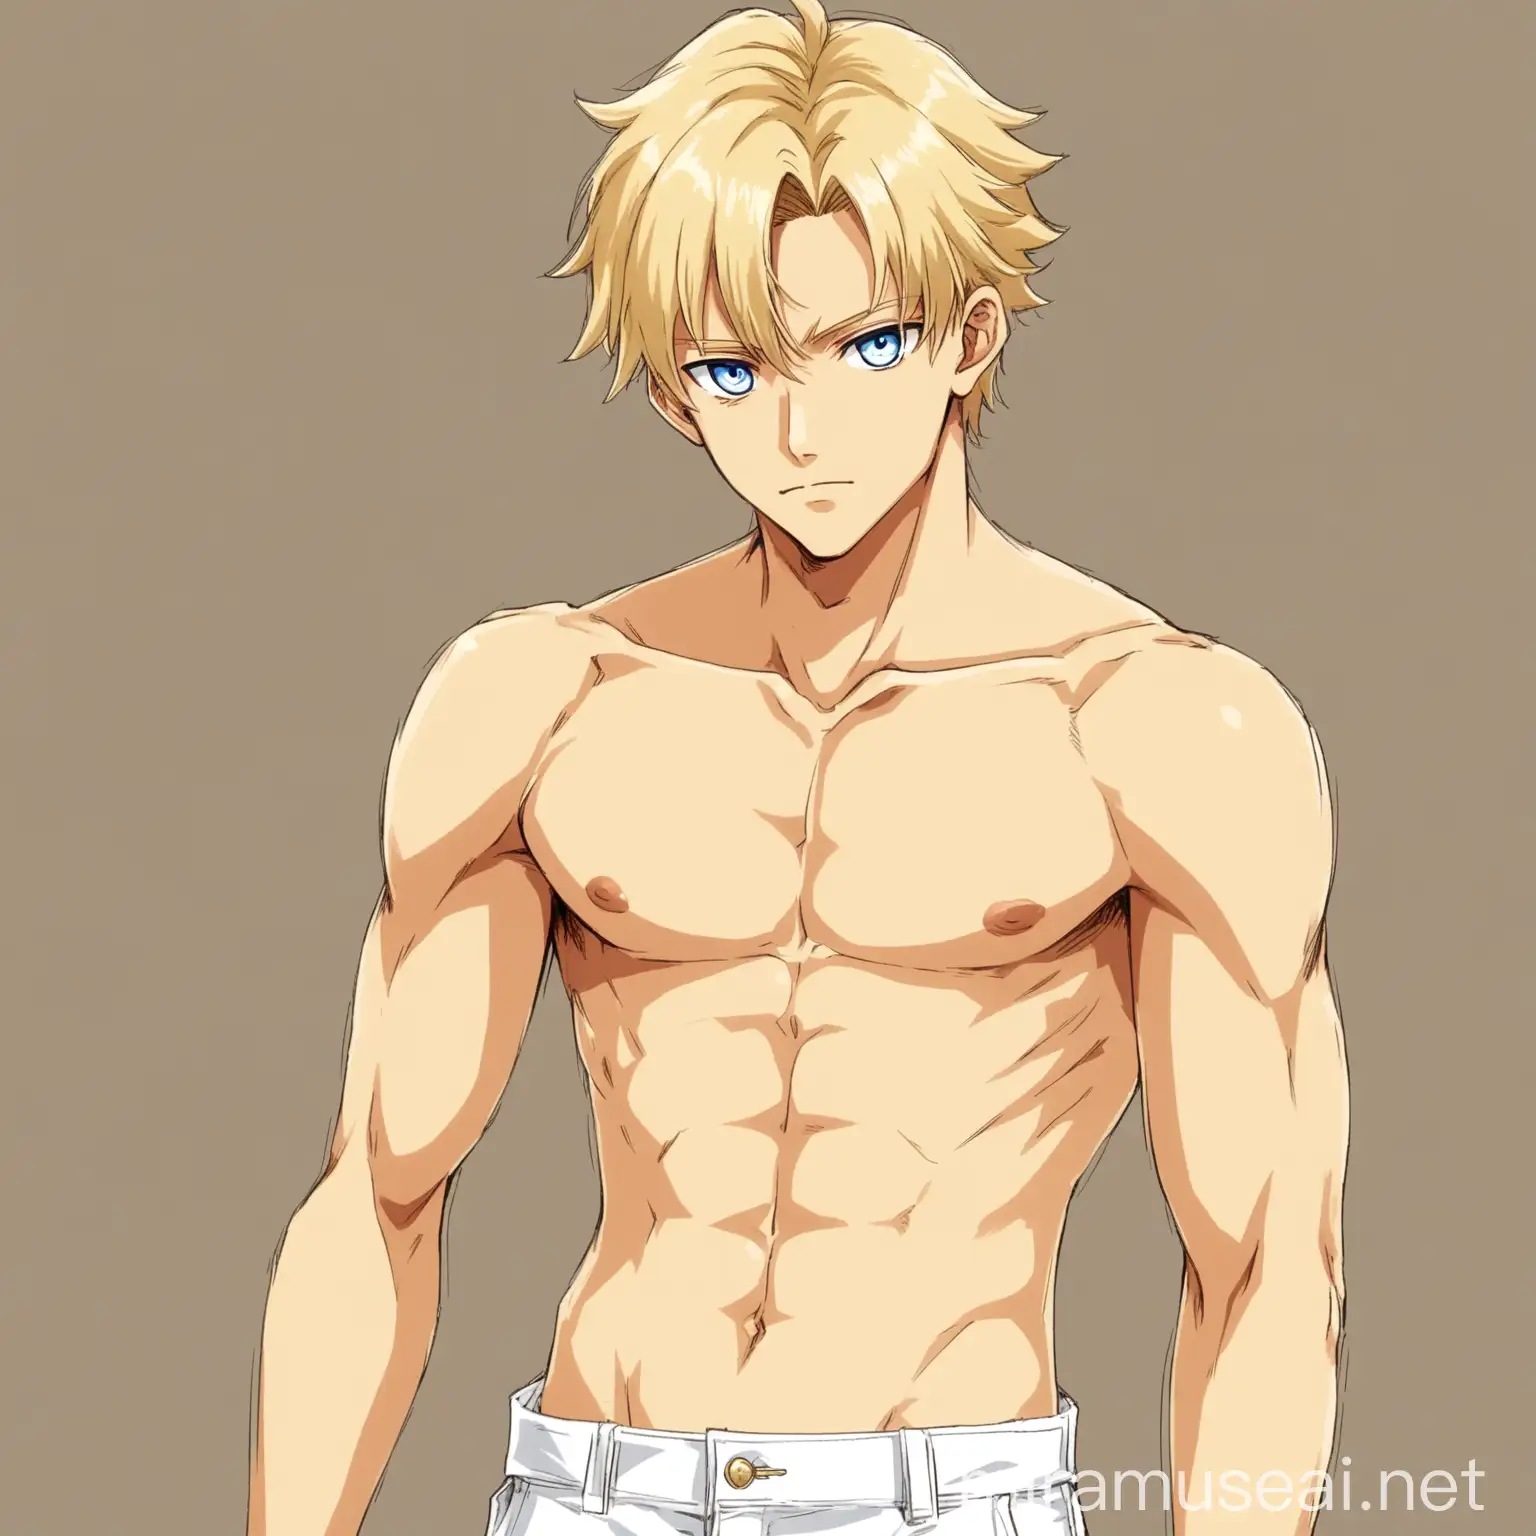 Blonde Anime Boy in White Pants Masculine with a Hint of Femininity